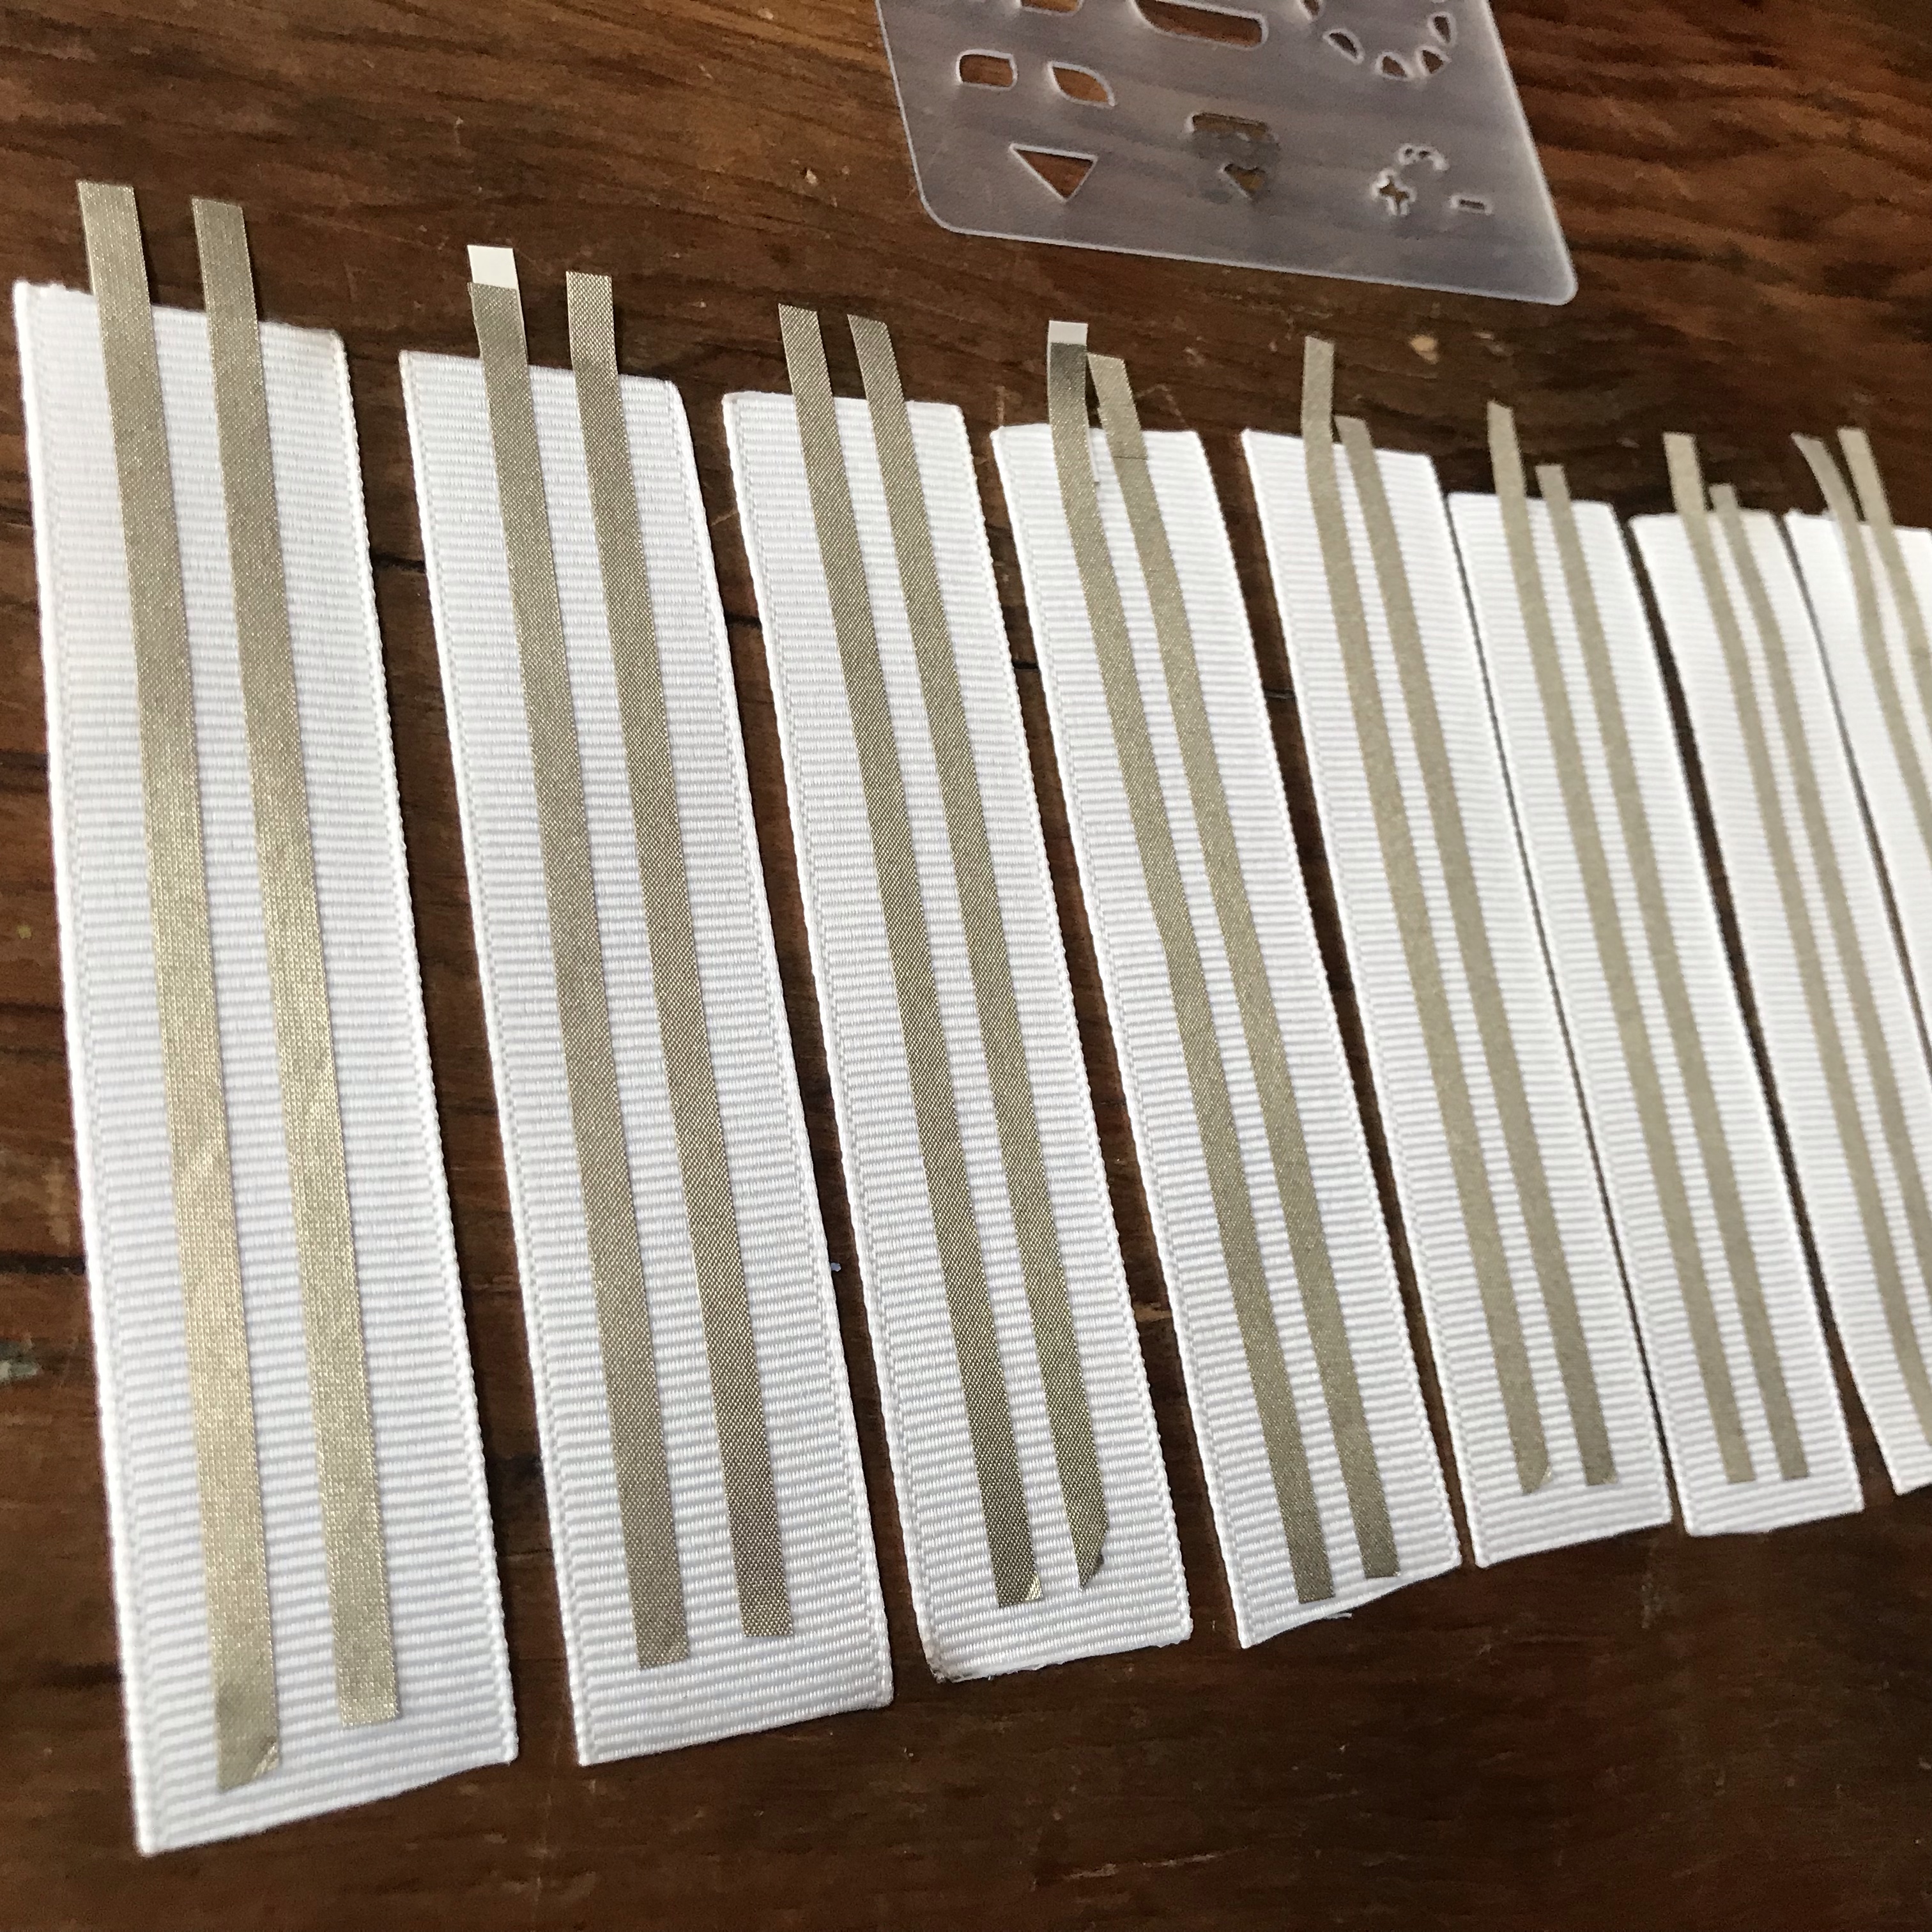 Seven pieces of 1 inch wide X 3" long white ribbon lay side by side upon a wooden table.  Each has two parallel traces of conductive fabric tape adhered in the center, with enough space between the leads for a Sticker LED.